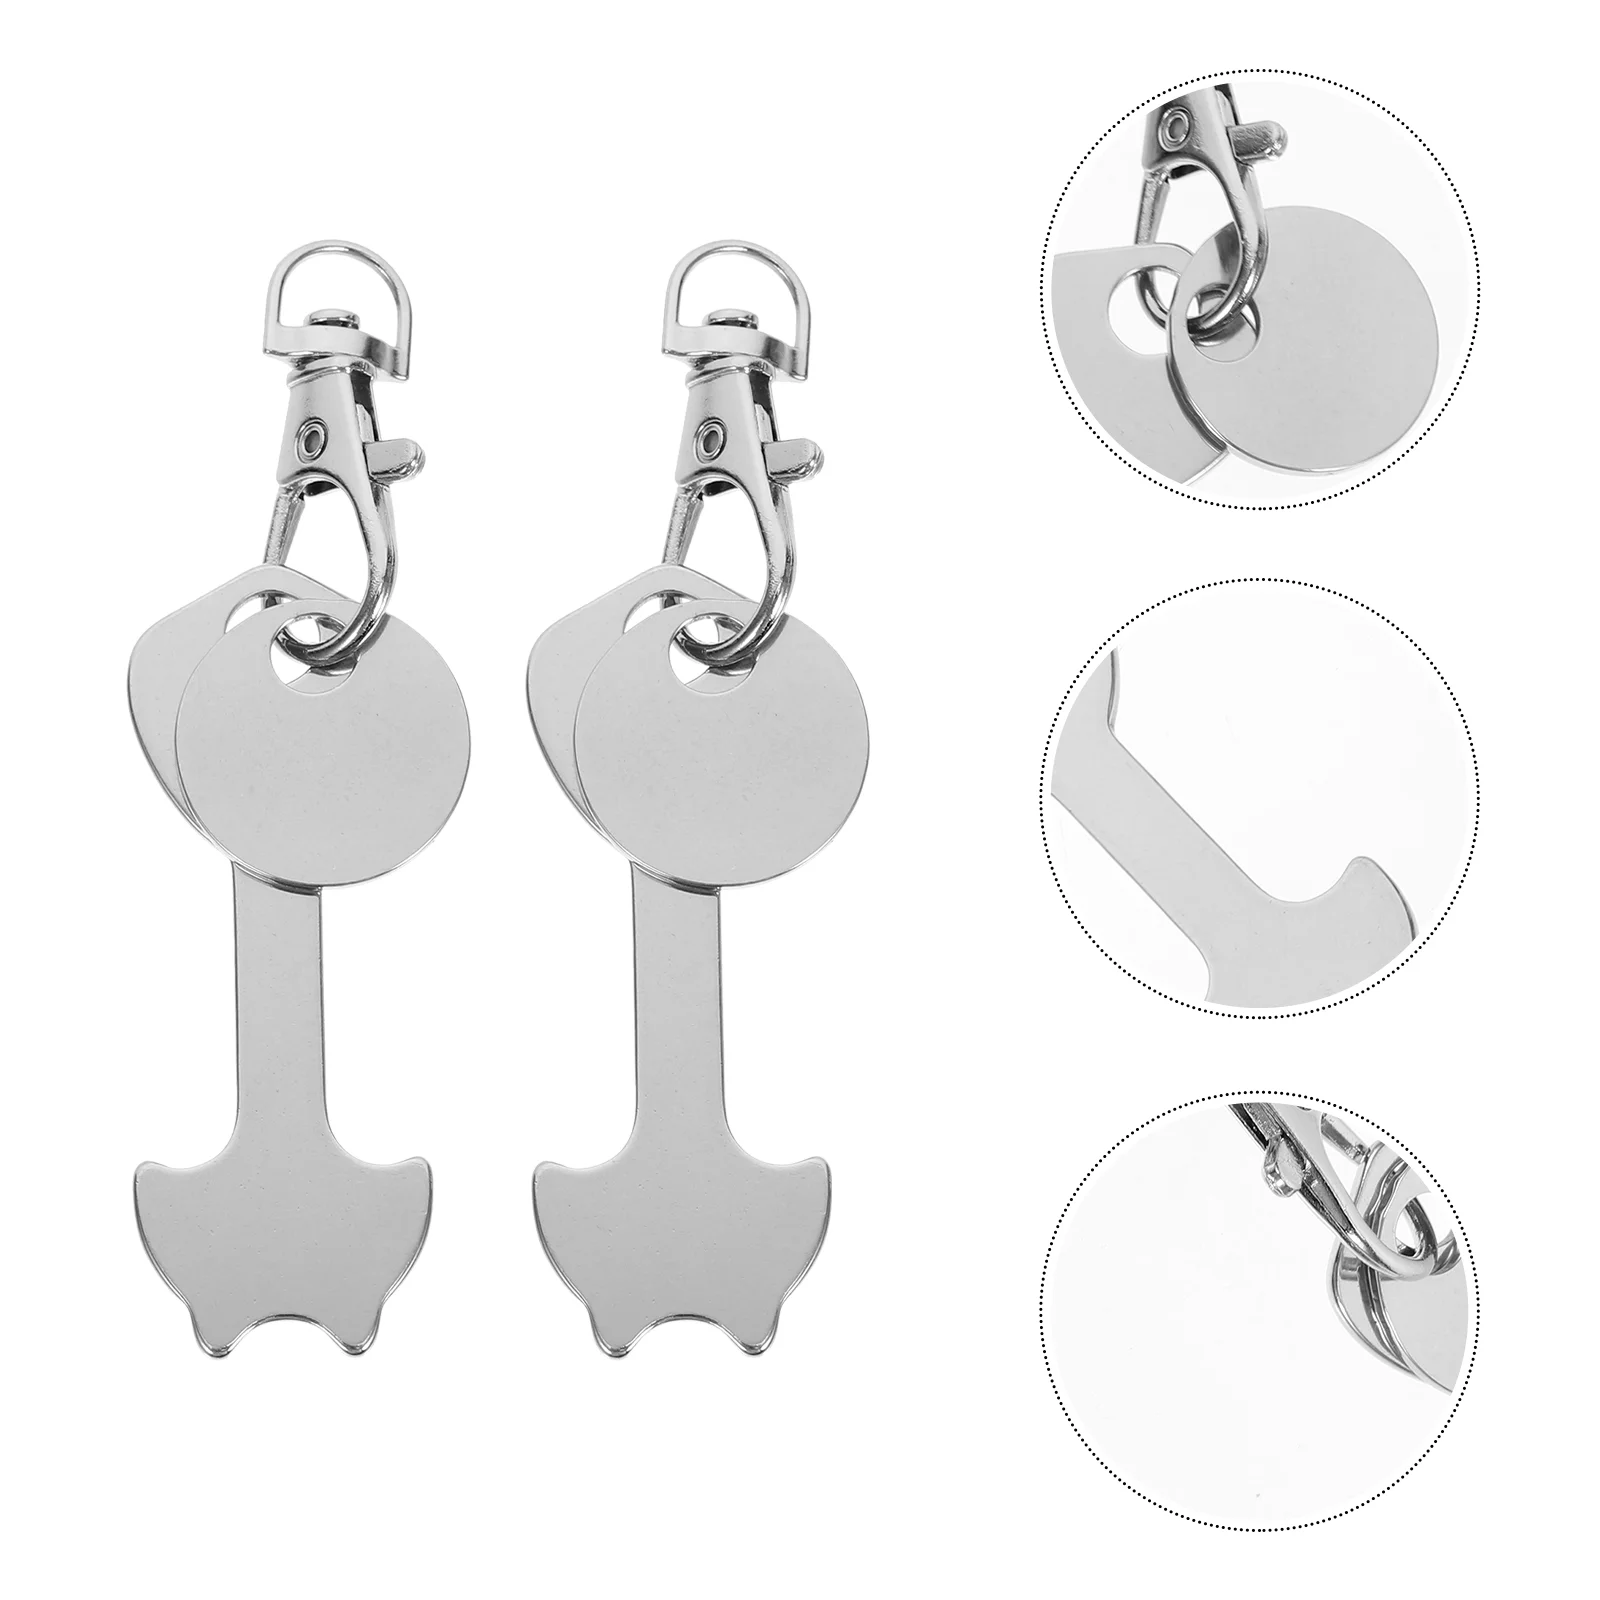 

Shopping Keychain Trolley Cart Tokens Token Coin Key Quarter Metal Steel Stainless Rings Keychains Change Holder Grocery Chain